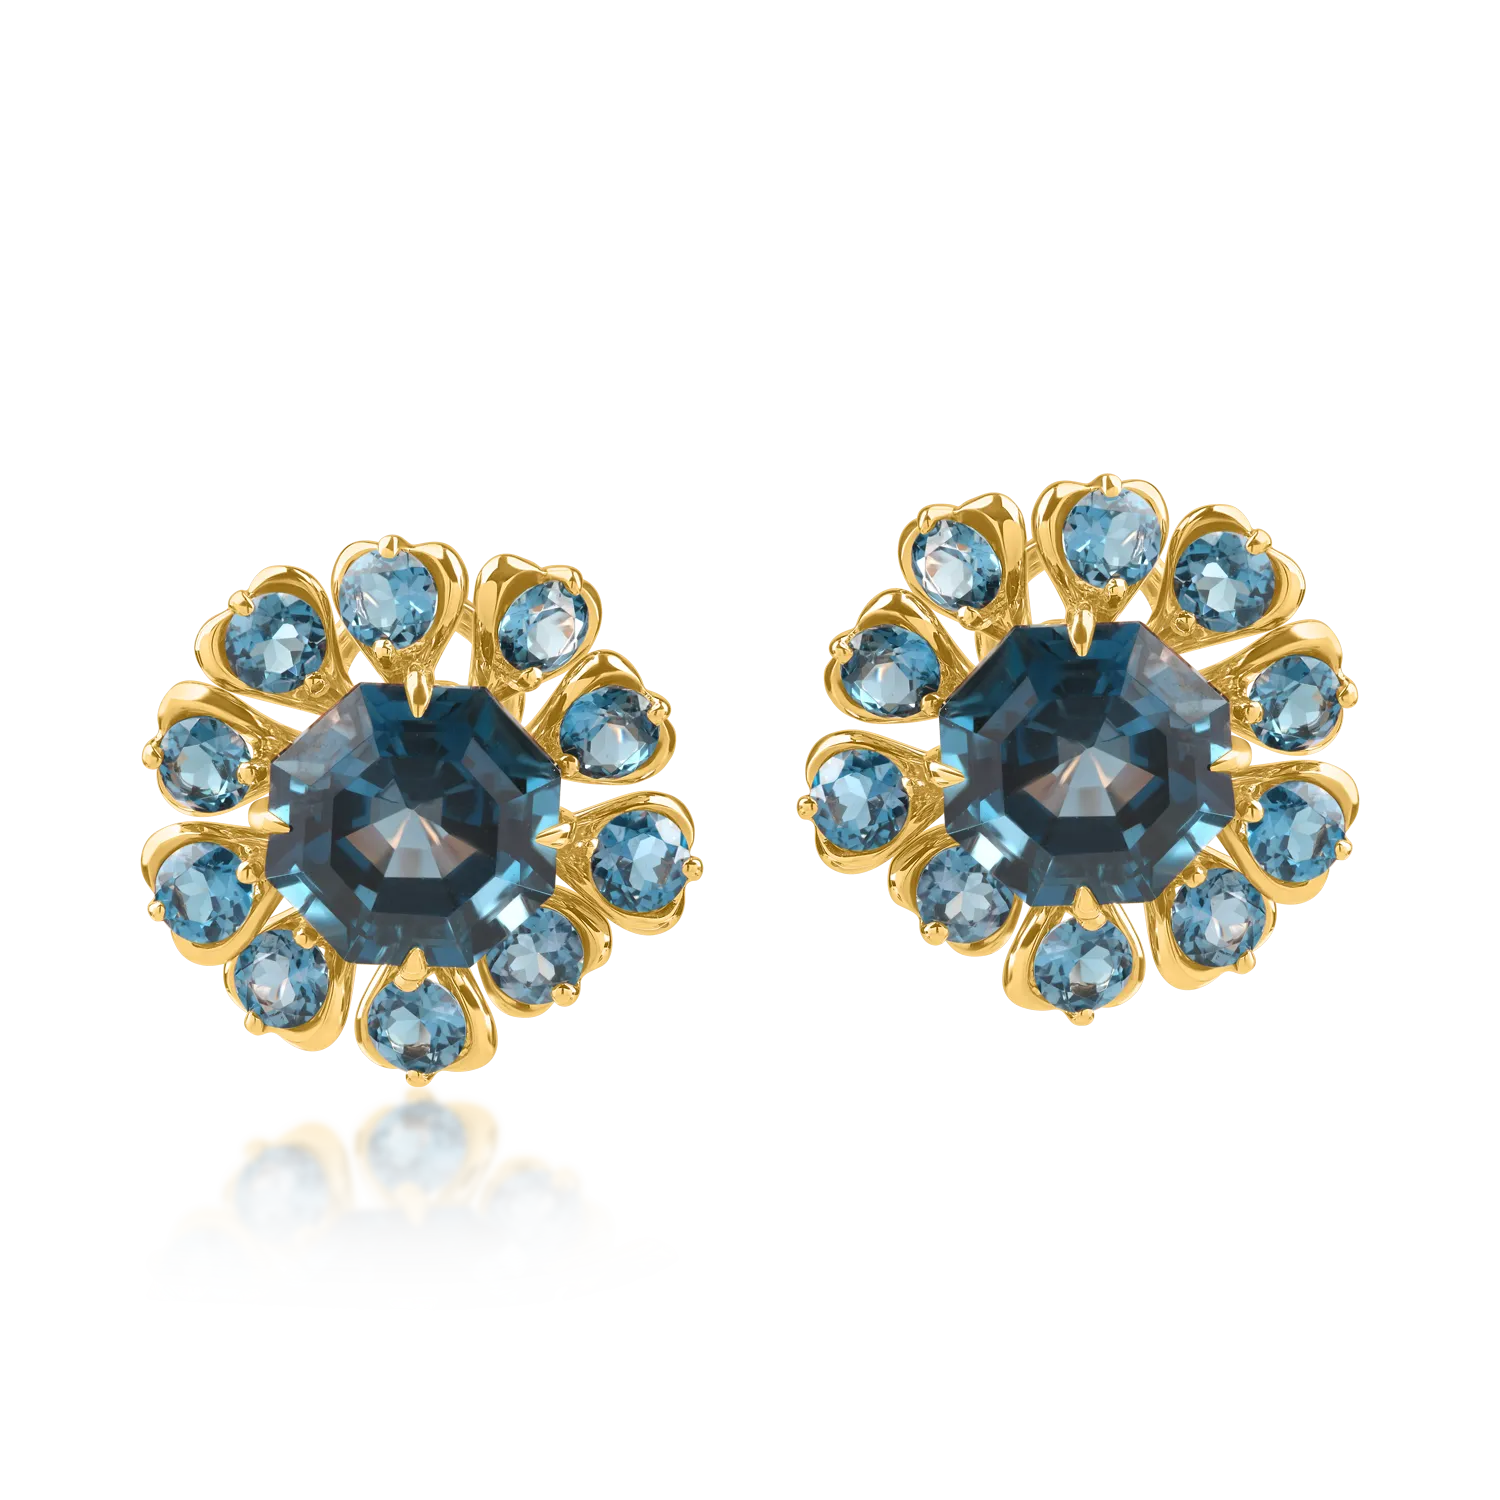 Yellow gold earrings with 13.6ct london blue topazes